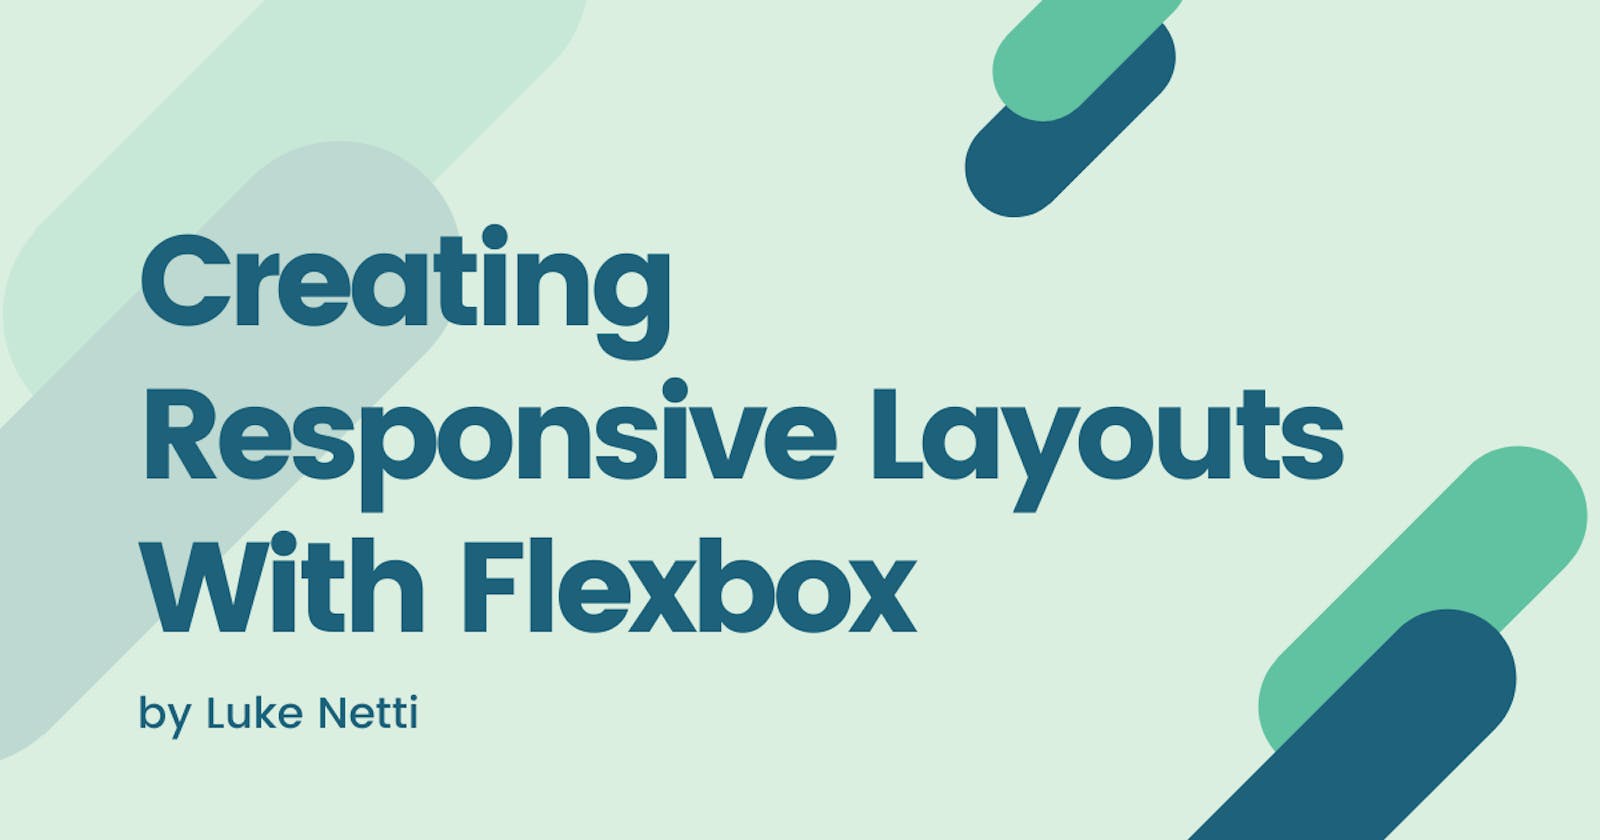 Creating Responsive Layouts With Flexbox